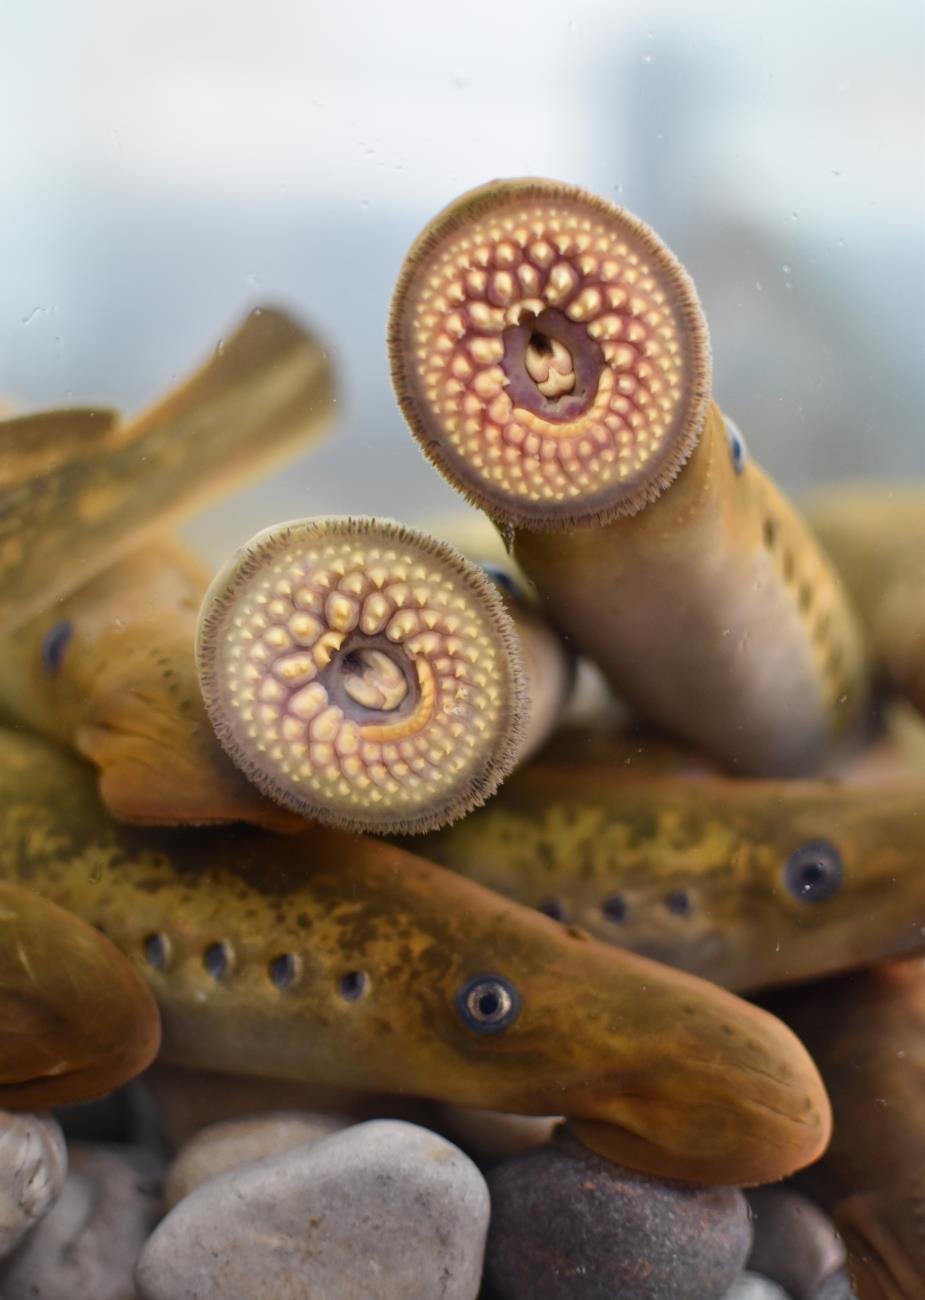 A tank full of sea lampreys – one of the most notorious invasive species in the Great Lakes.